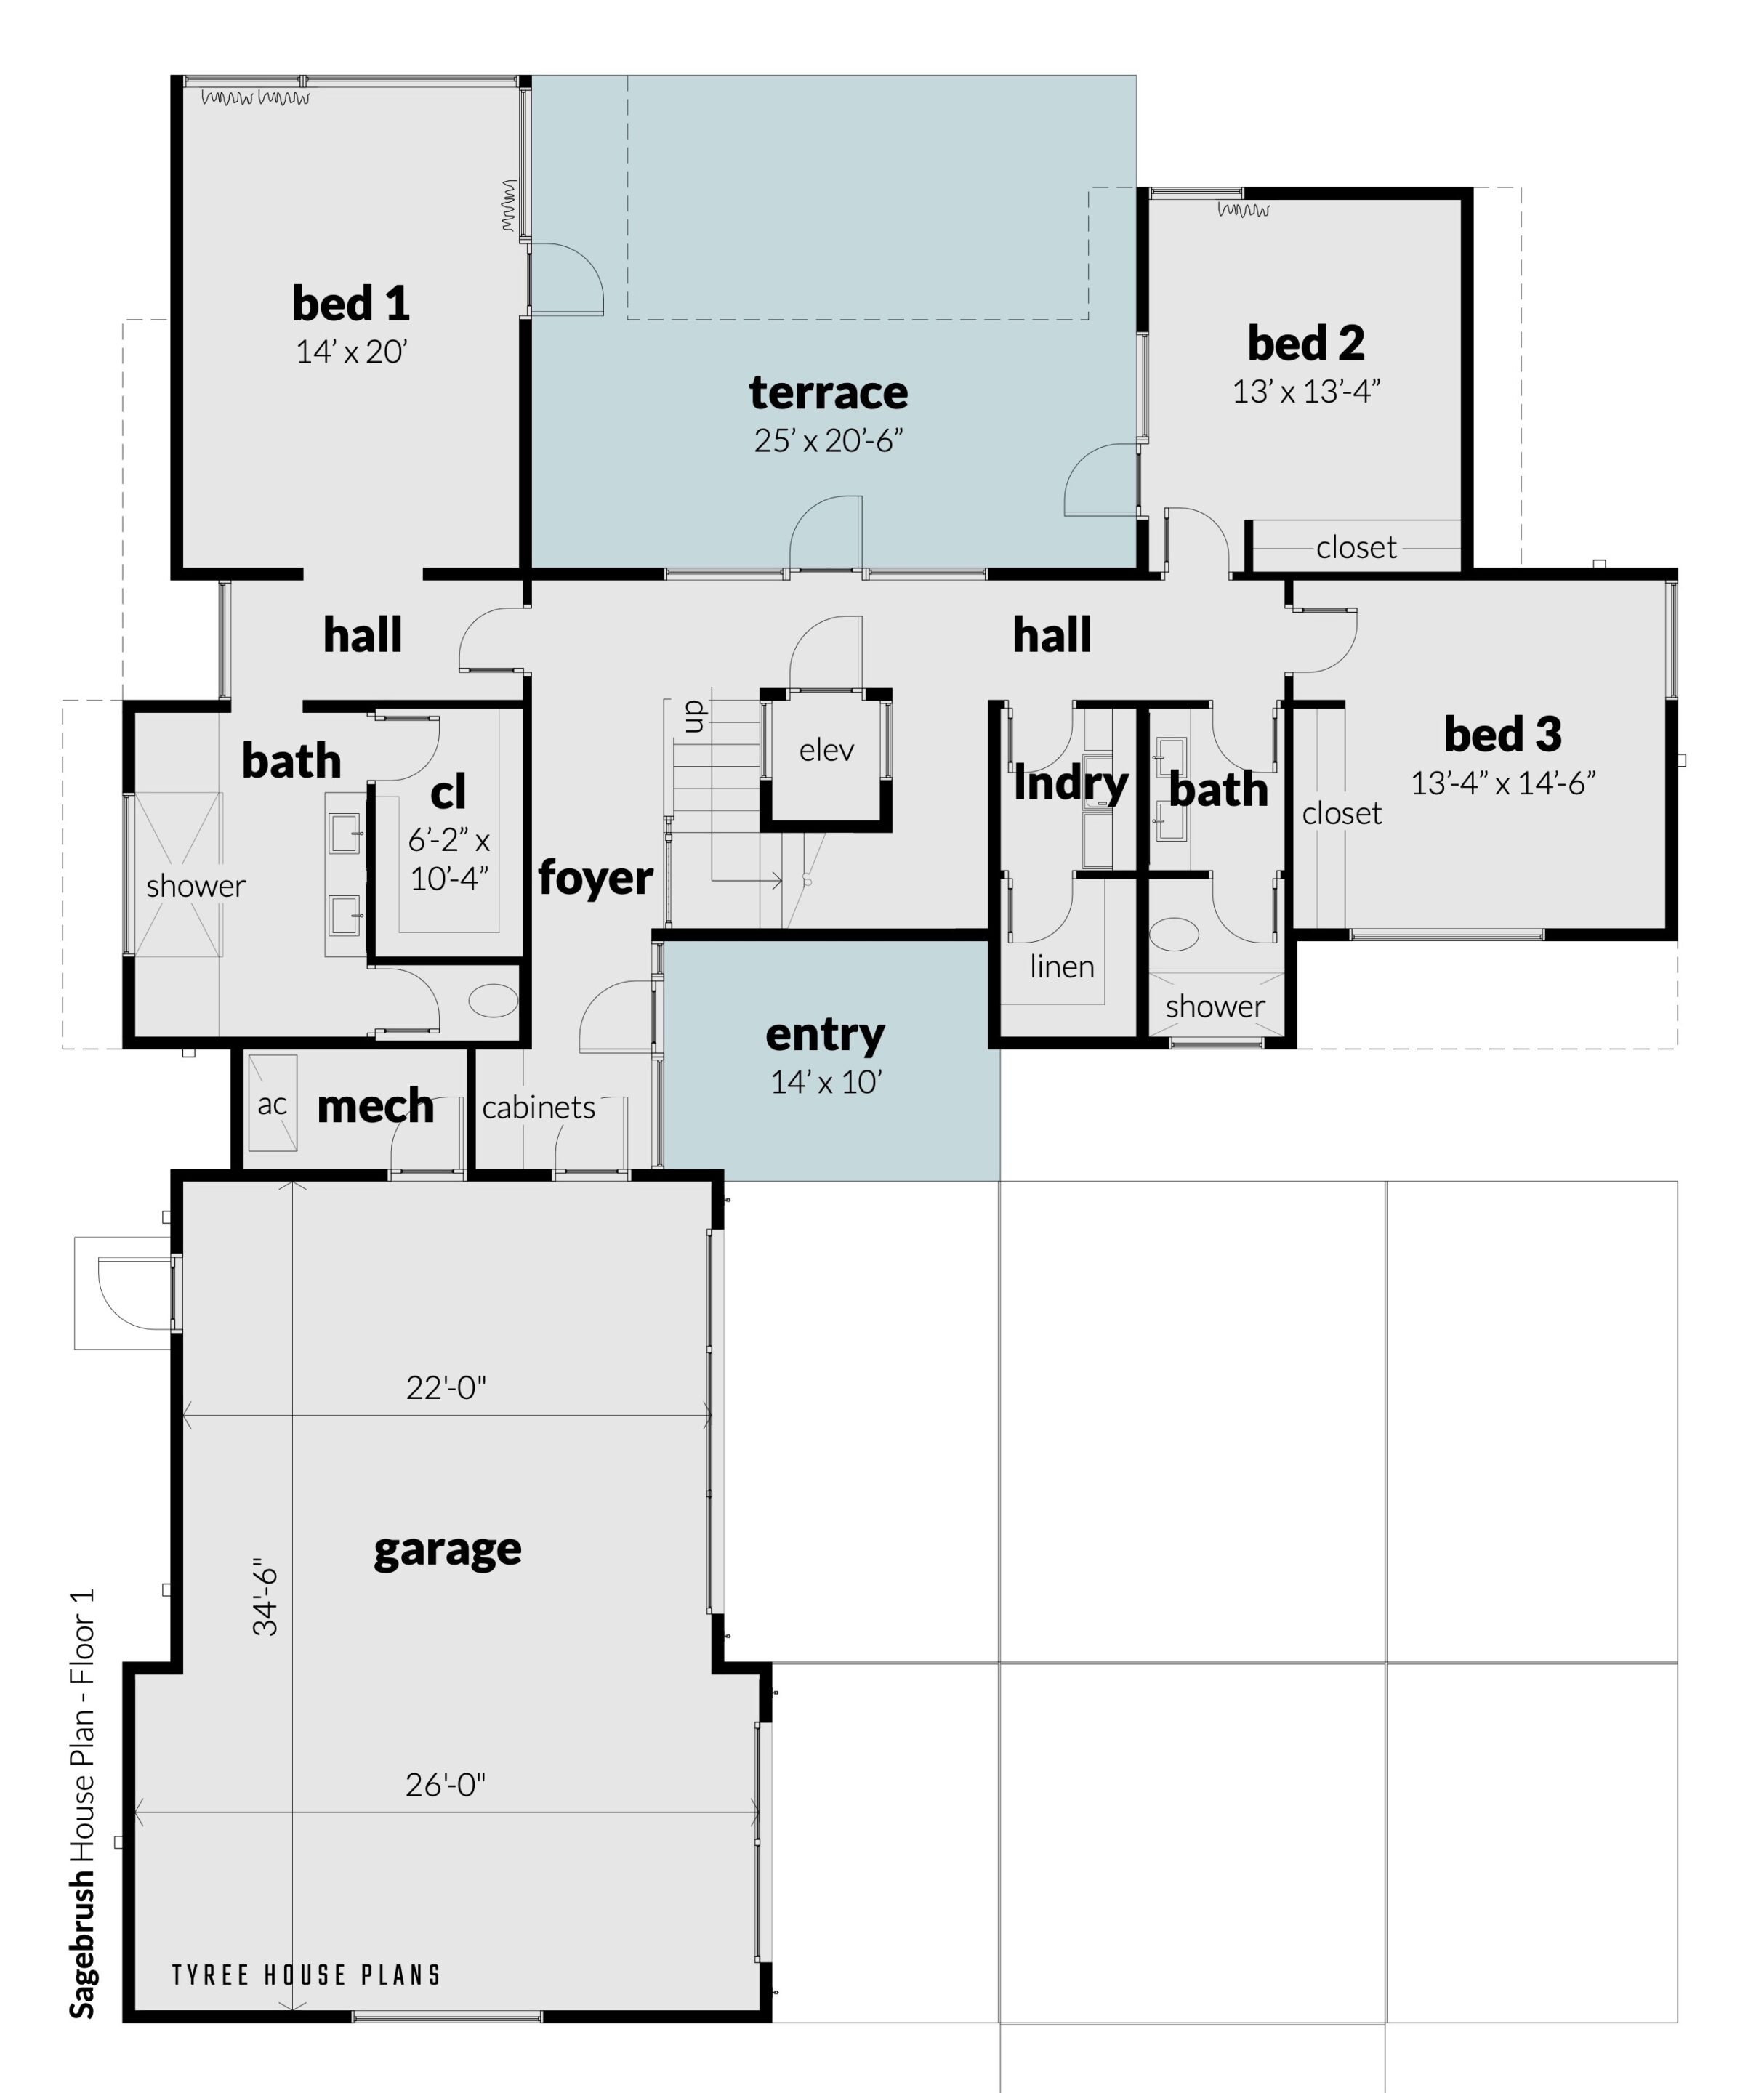 Sagebrush House Plan by Tyree House Plans